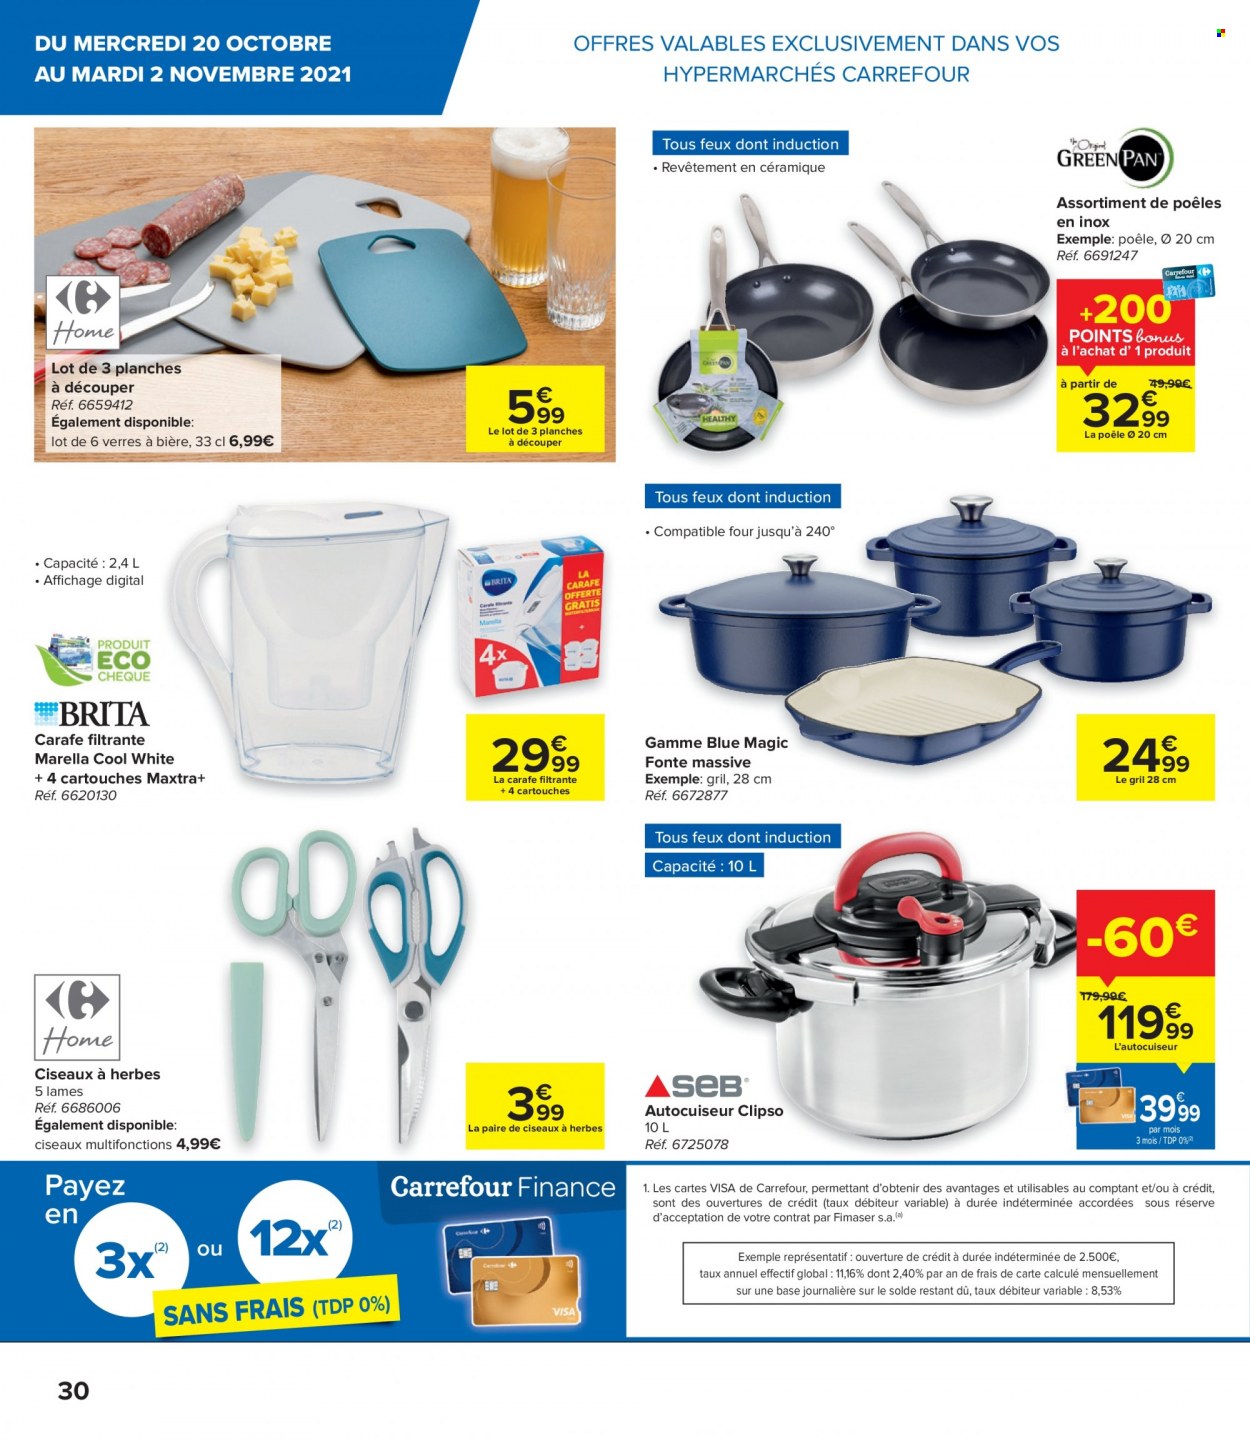 Catalogue Carrefour hypermarkt - 20.10.2021 - 2.11.2021. Page 6.